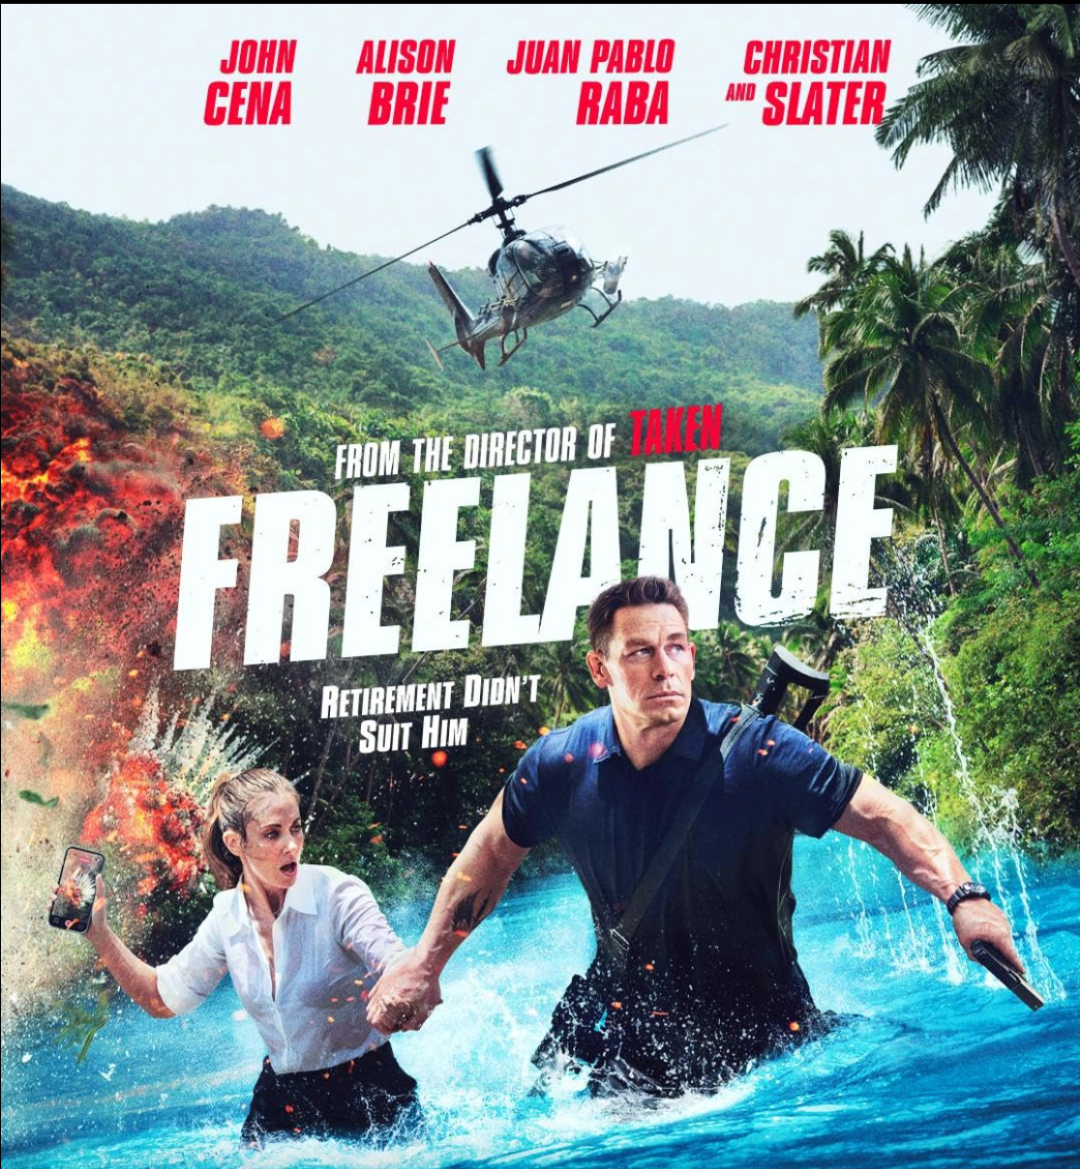 Claire and Mason crossing a river as something explodes behind them and a helicopter flies overhead. He has a handgun in his hand an larger gun strapped to his back. She is holding her phone. The text has the main actors' names across the top and then reads: FROM THE DIRECTOR OF TAKEN, FREELANCE "RETIREMENT DIDN'T SUIT HIM."